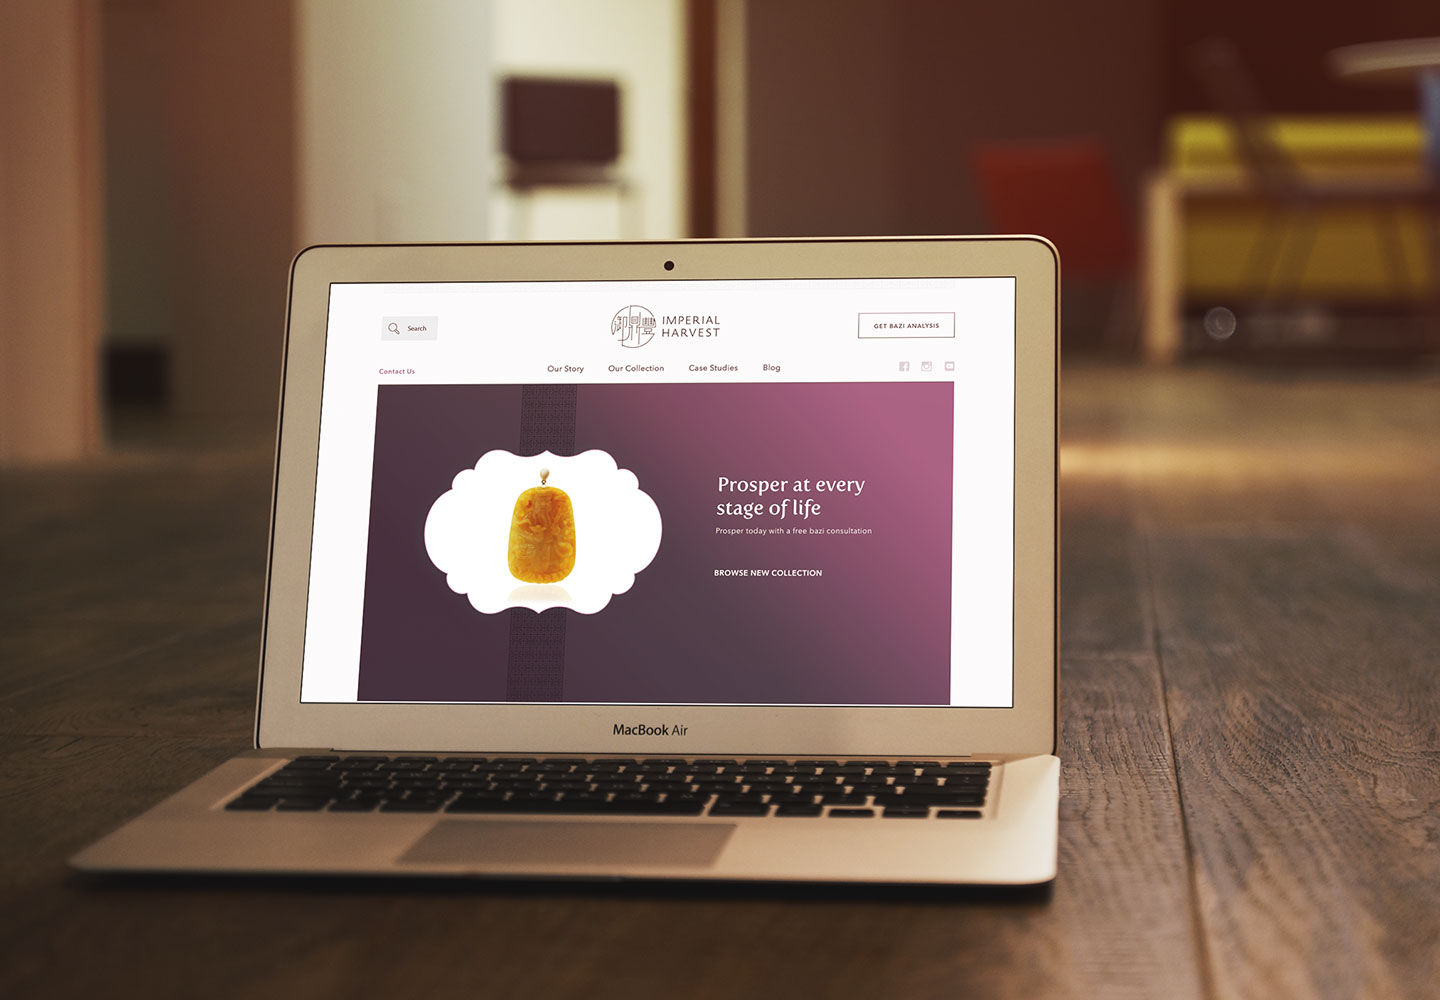 Brand consultancy in Lifestyle Industry. Website design for Imperial Harvest.